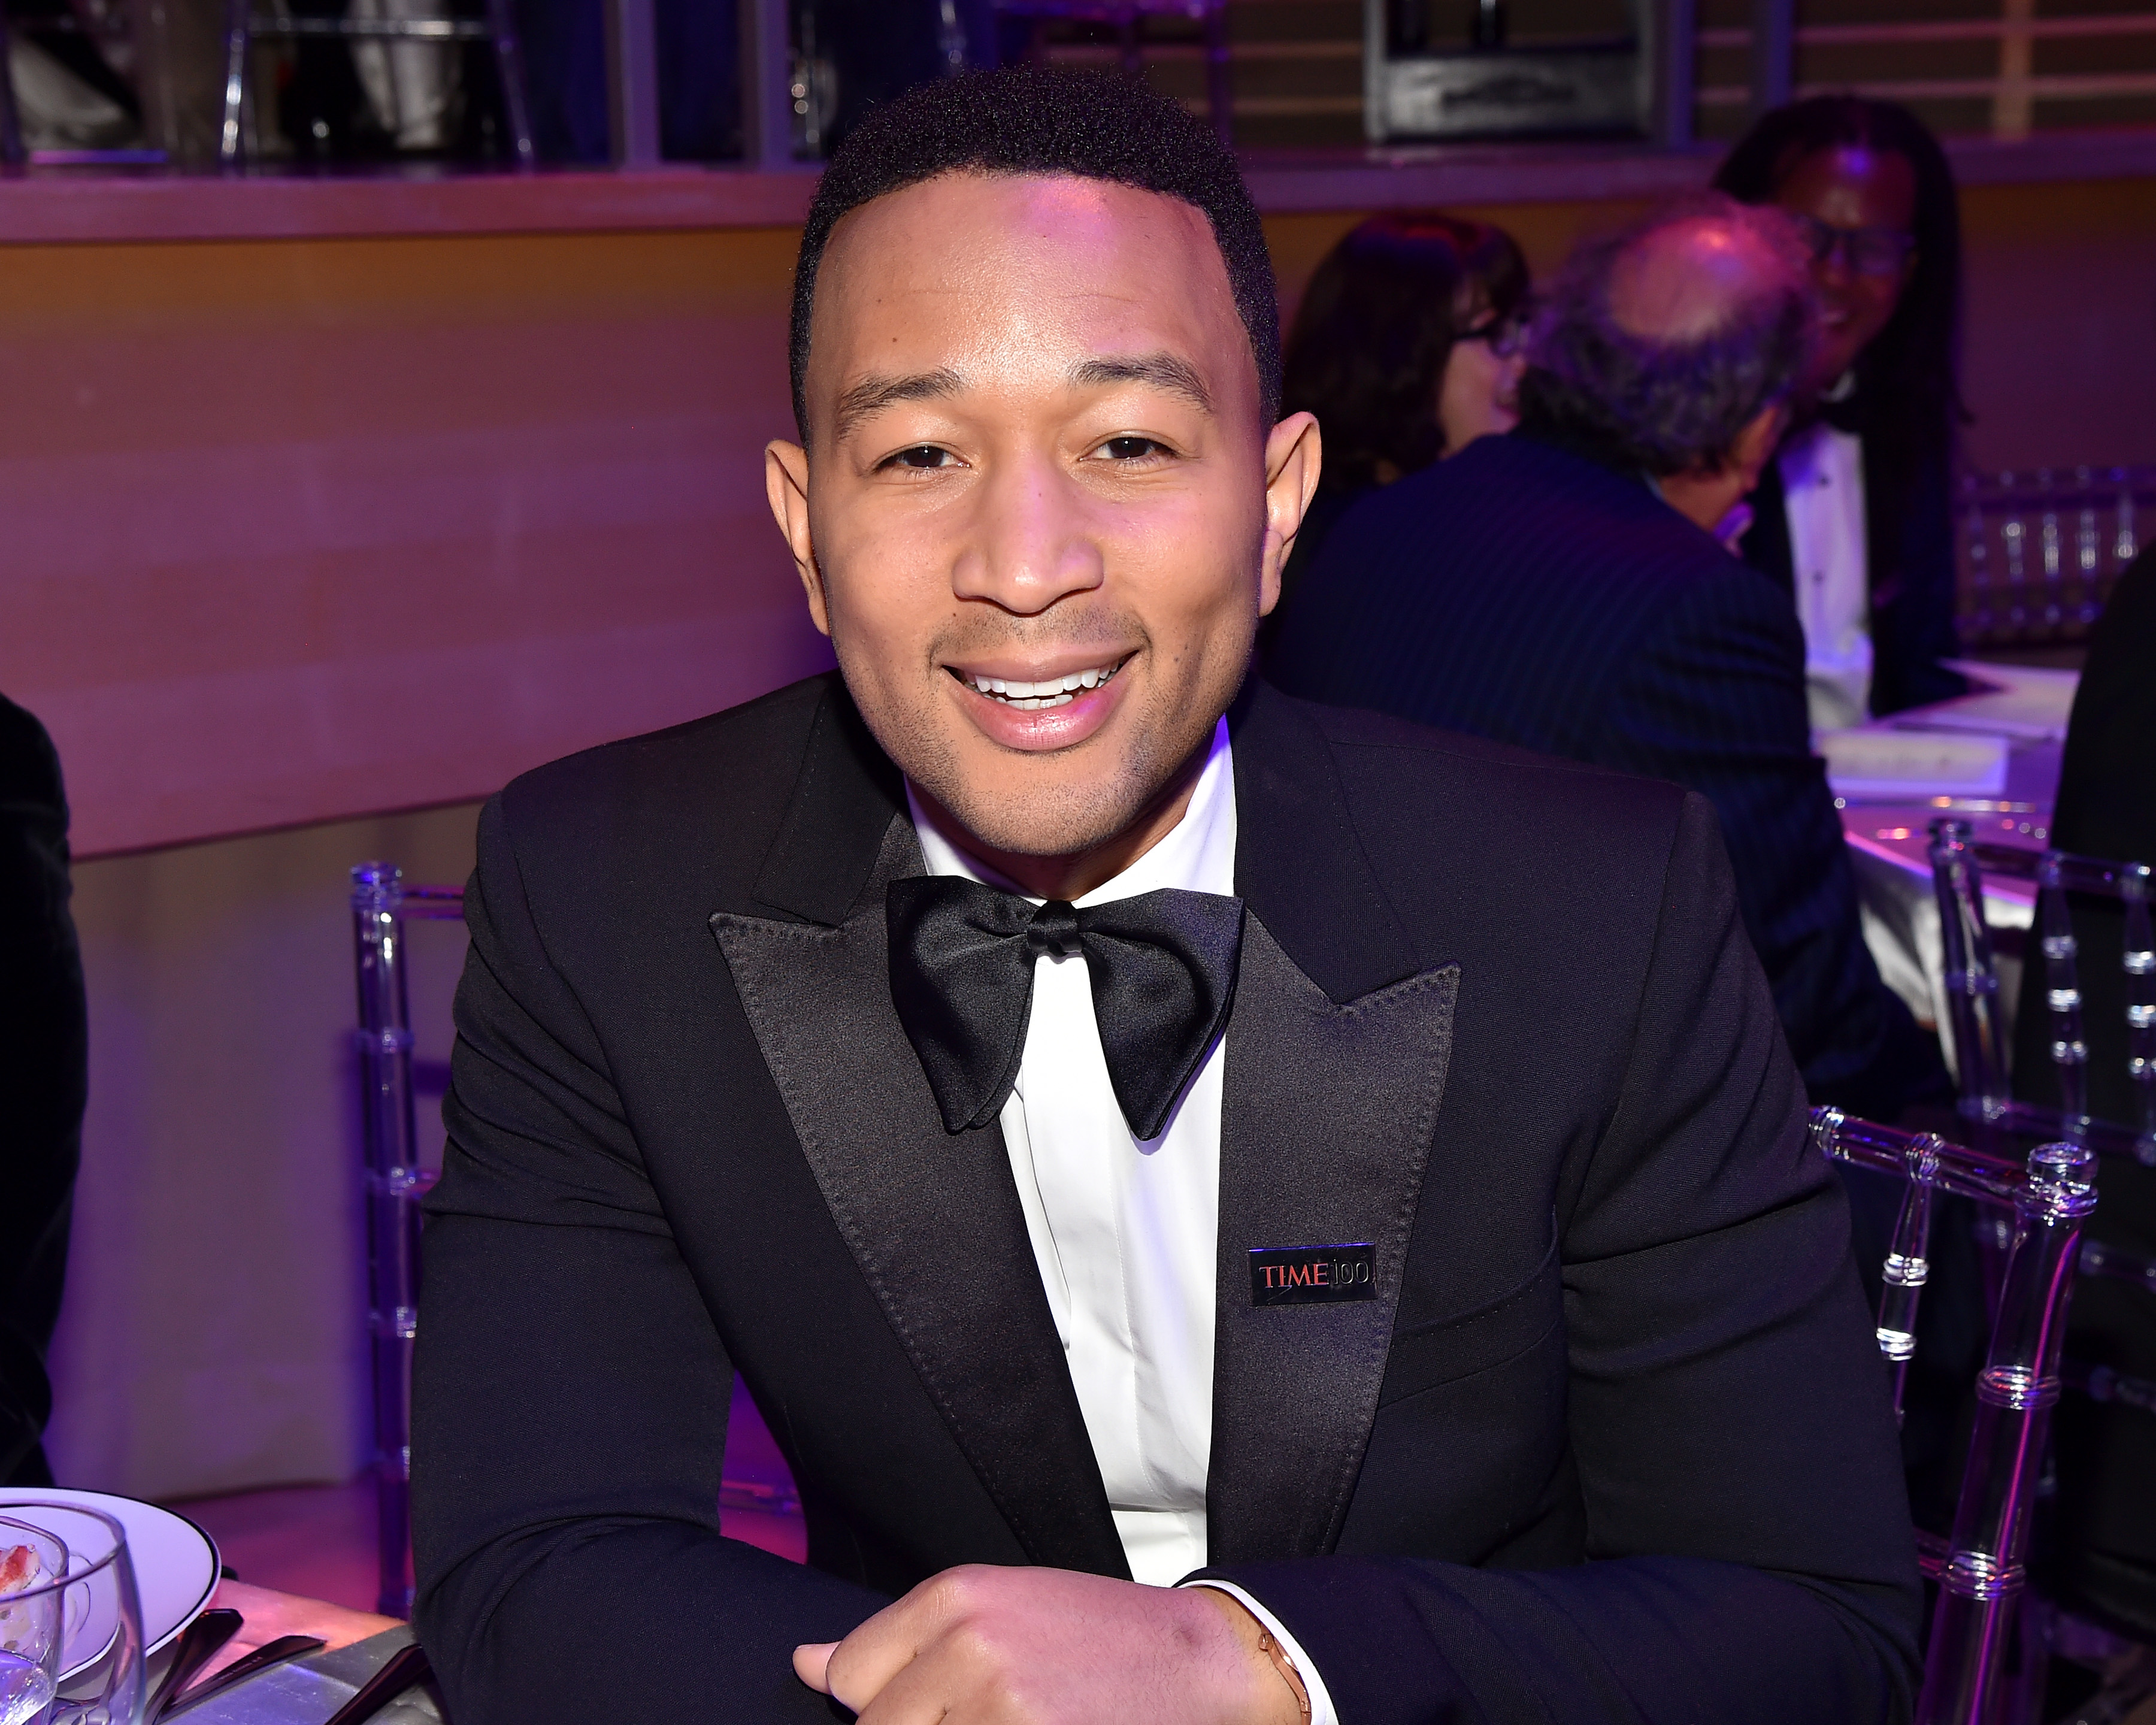 John Legend attends the 2017 TIME 100 Gala at Jazz at Lincoln Center on April 25, 2017 in New York City.